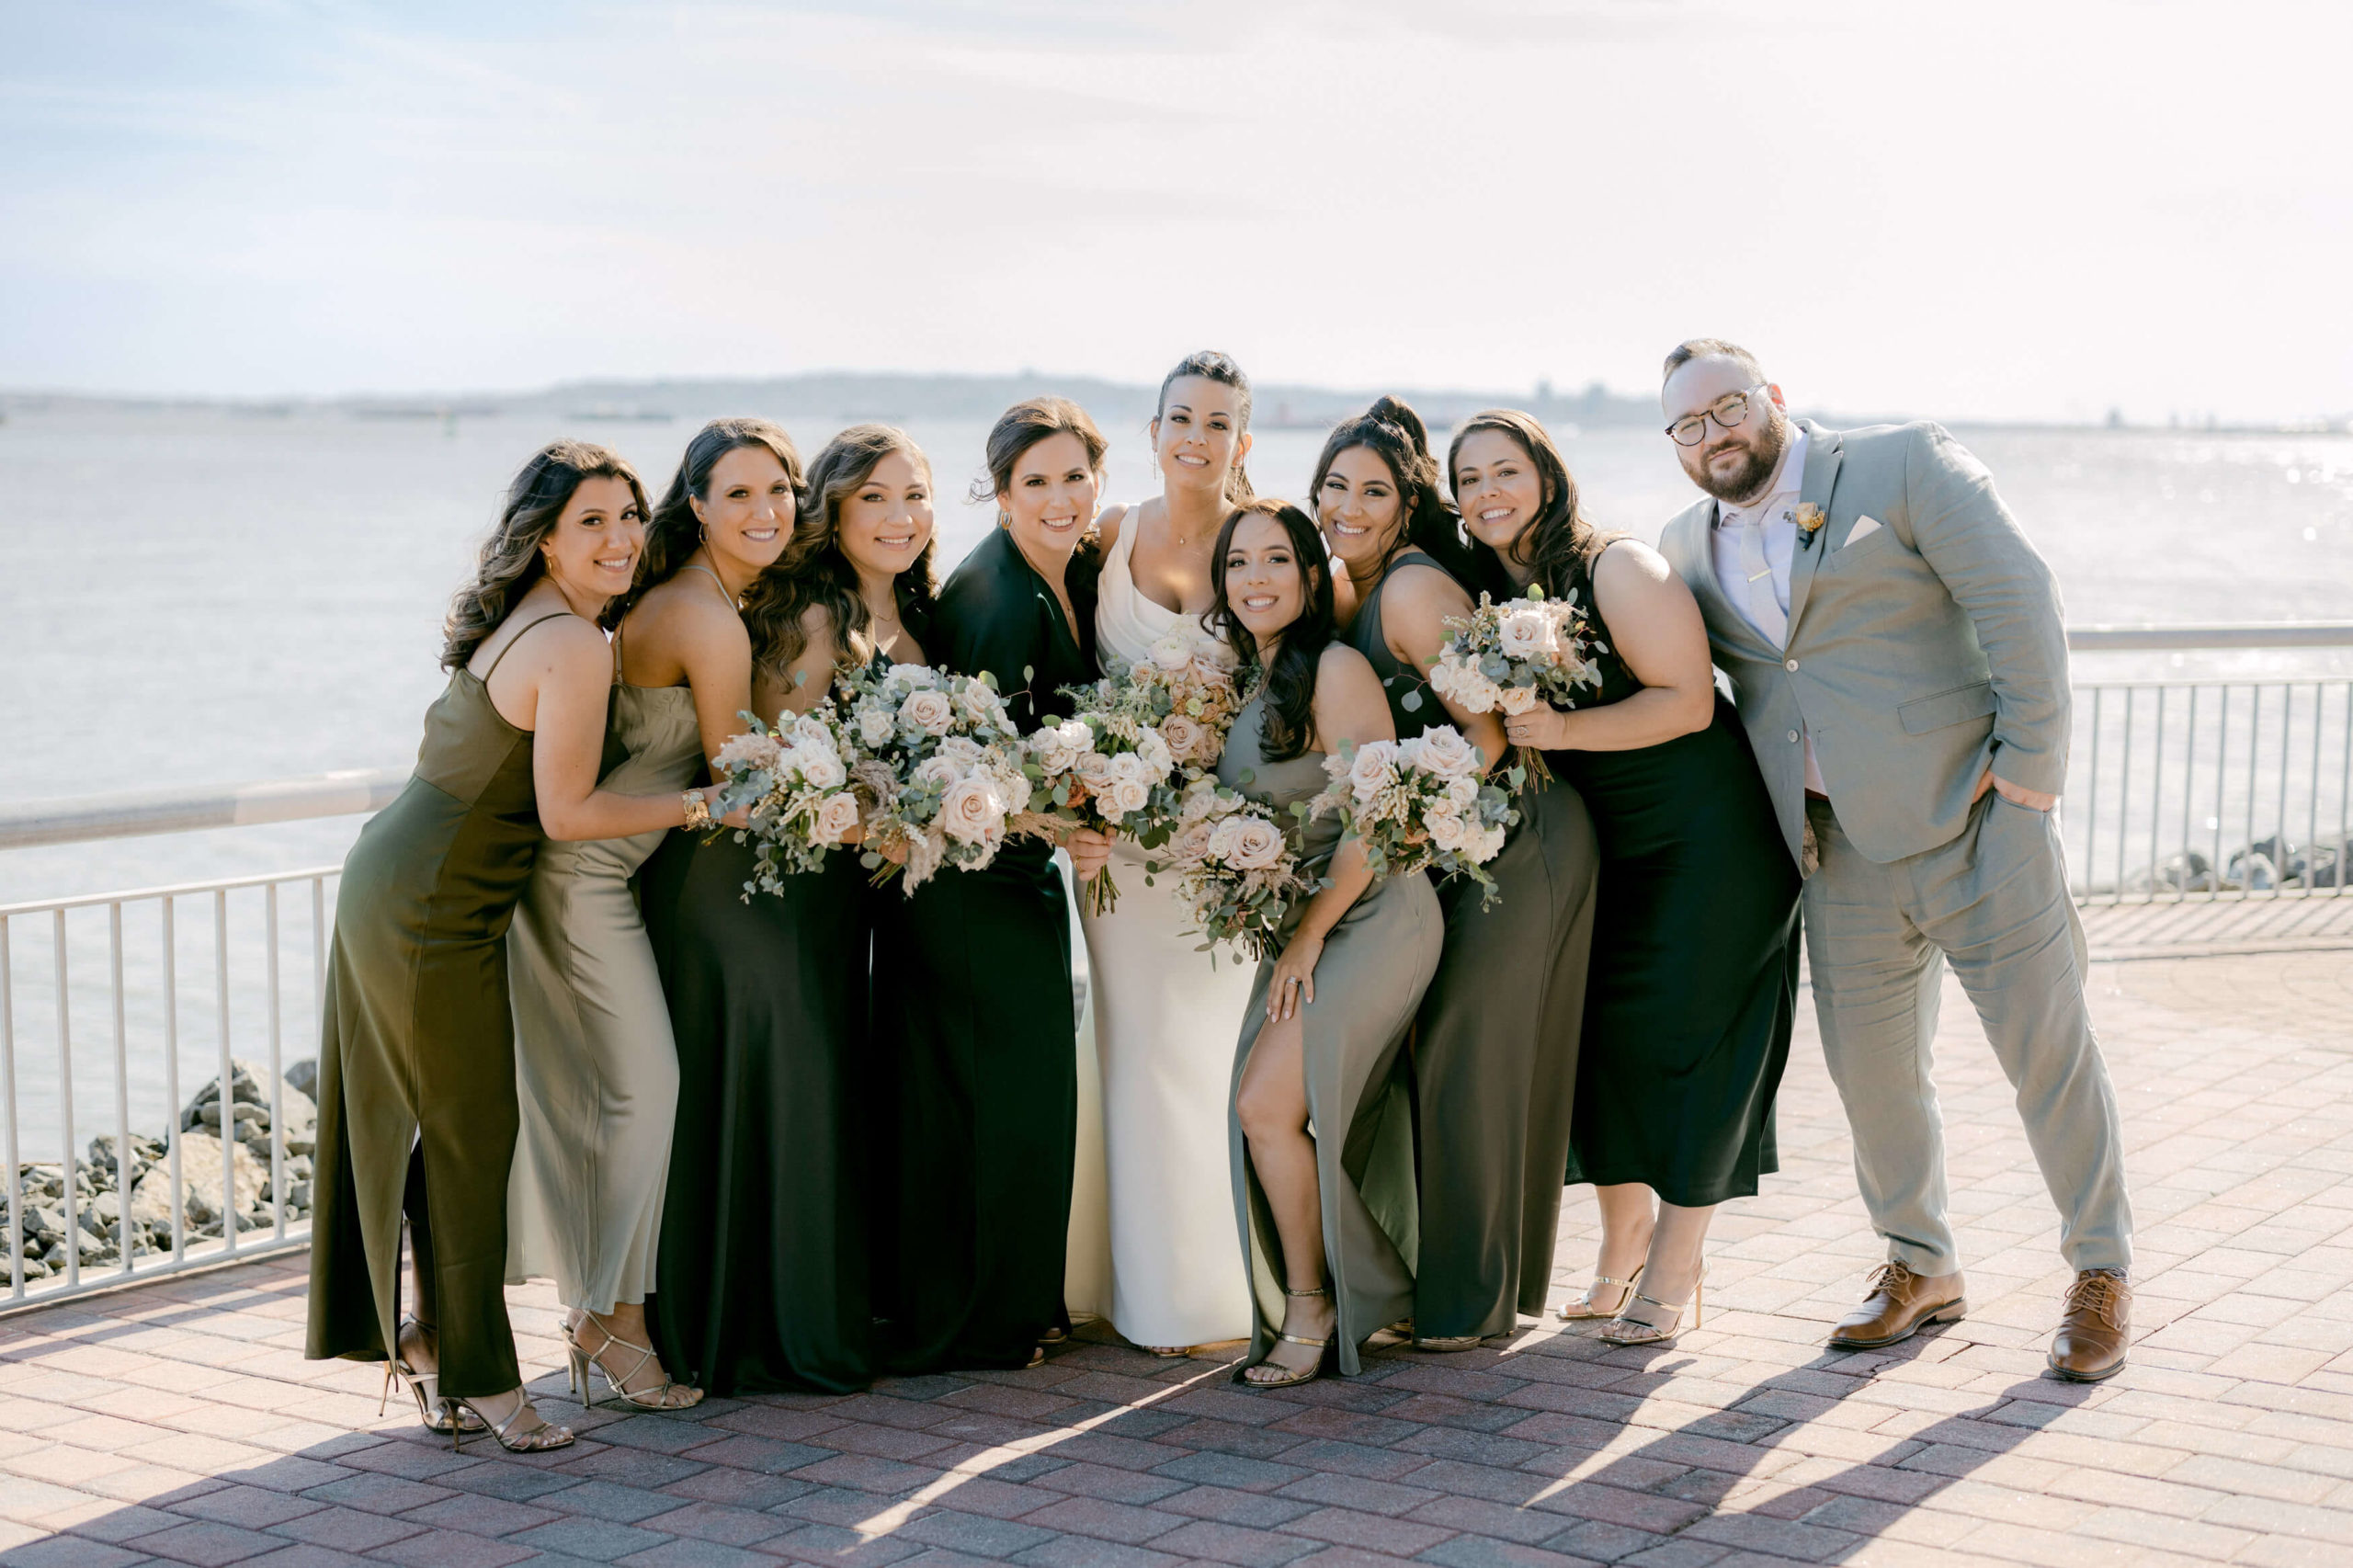 The bride and the bridesmaids are smiling while holding flower bouquets. Editorial wedding image by Jenny Fu Studio